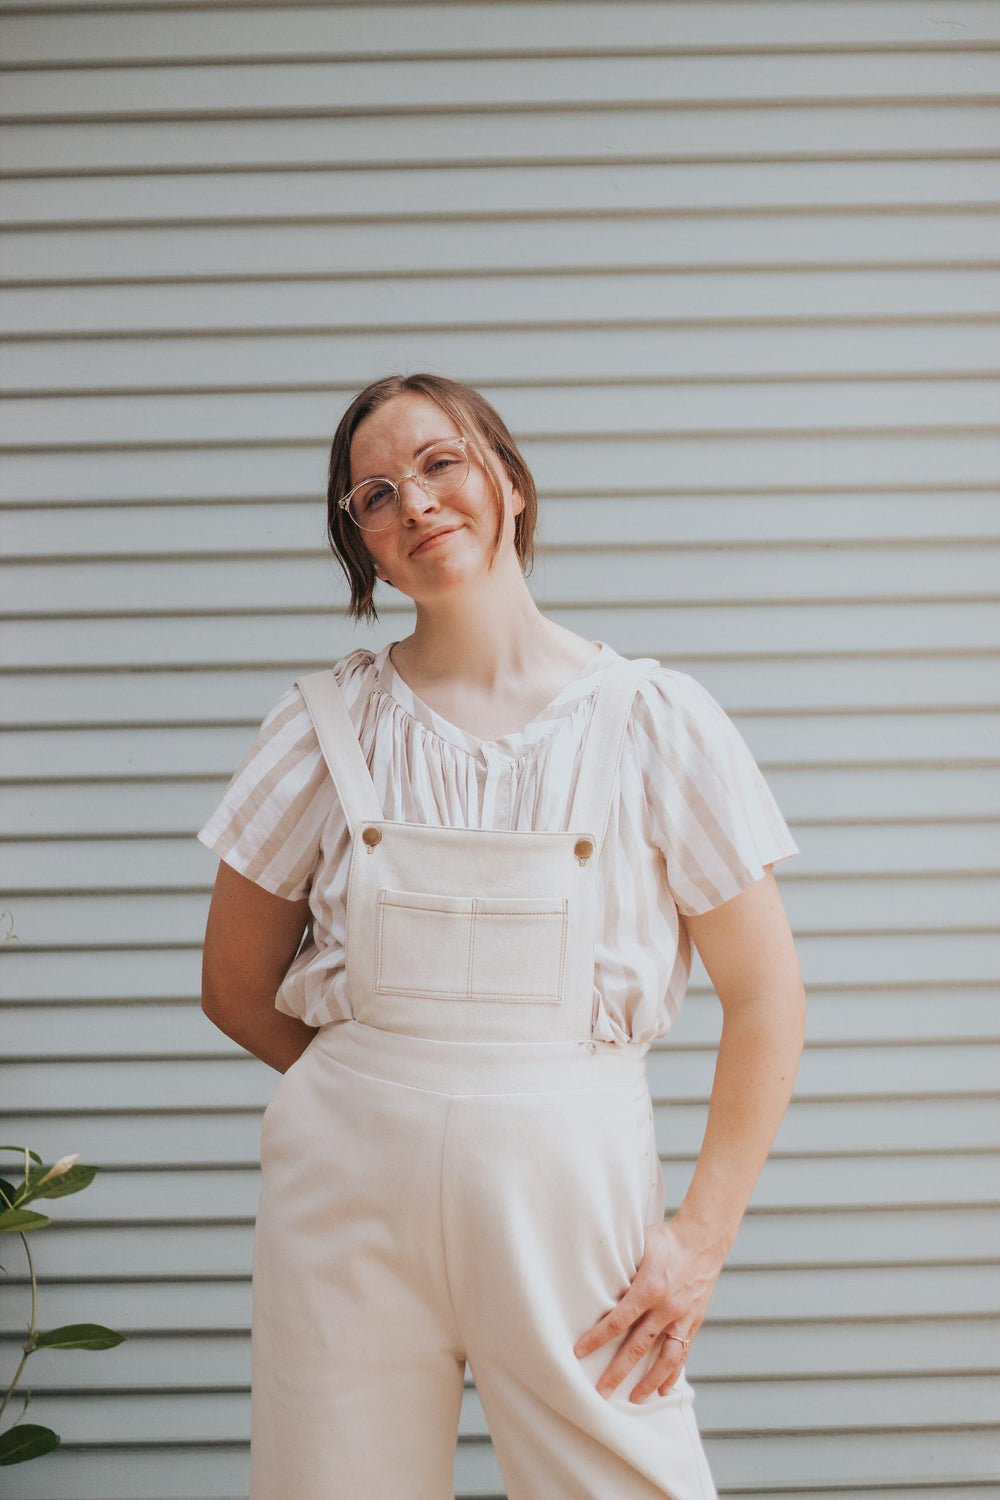 Woman wearing the Jordan Overalls sewing pattern from Madswick on The Fold Line. A dungaree pattern made in wool blends, linen, duck canvas, cotton twill, or denim fabrics, featuring a cropped bib with pockets, high waist, elasticated back waistband, back